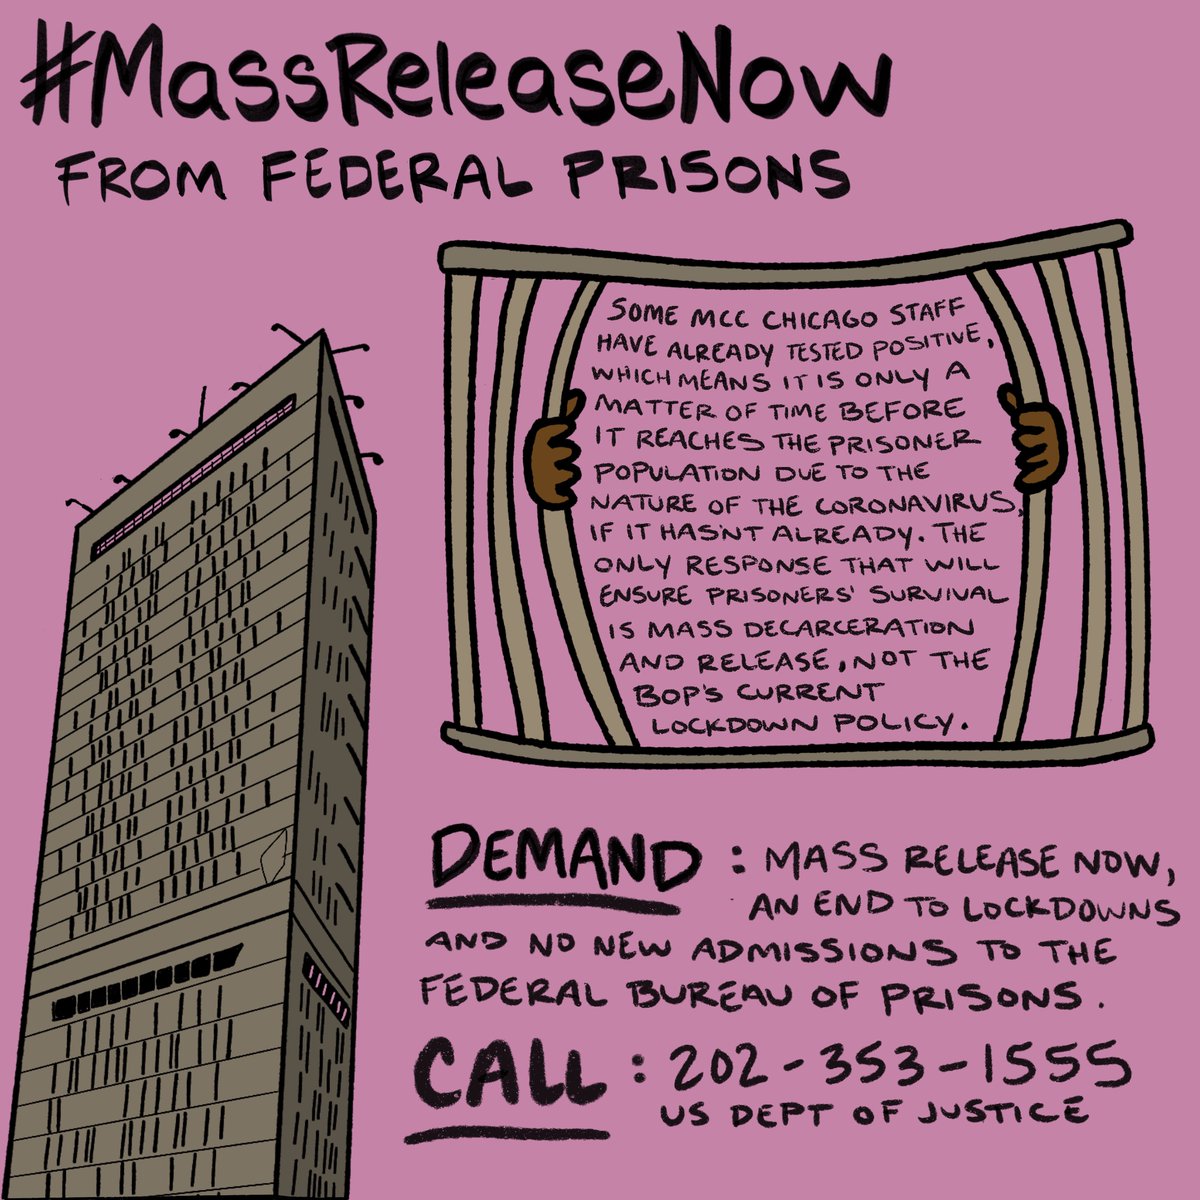 7. Another phone call, let's do this! Demand  #MassReleaseNow, an end to lockdowns, and no more new admissions to the MCC downtown during the  #COVID19 pandemic. Call the US Dept of Justice: 202-353-1555.  #AbolishPrisons